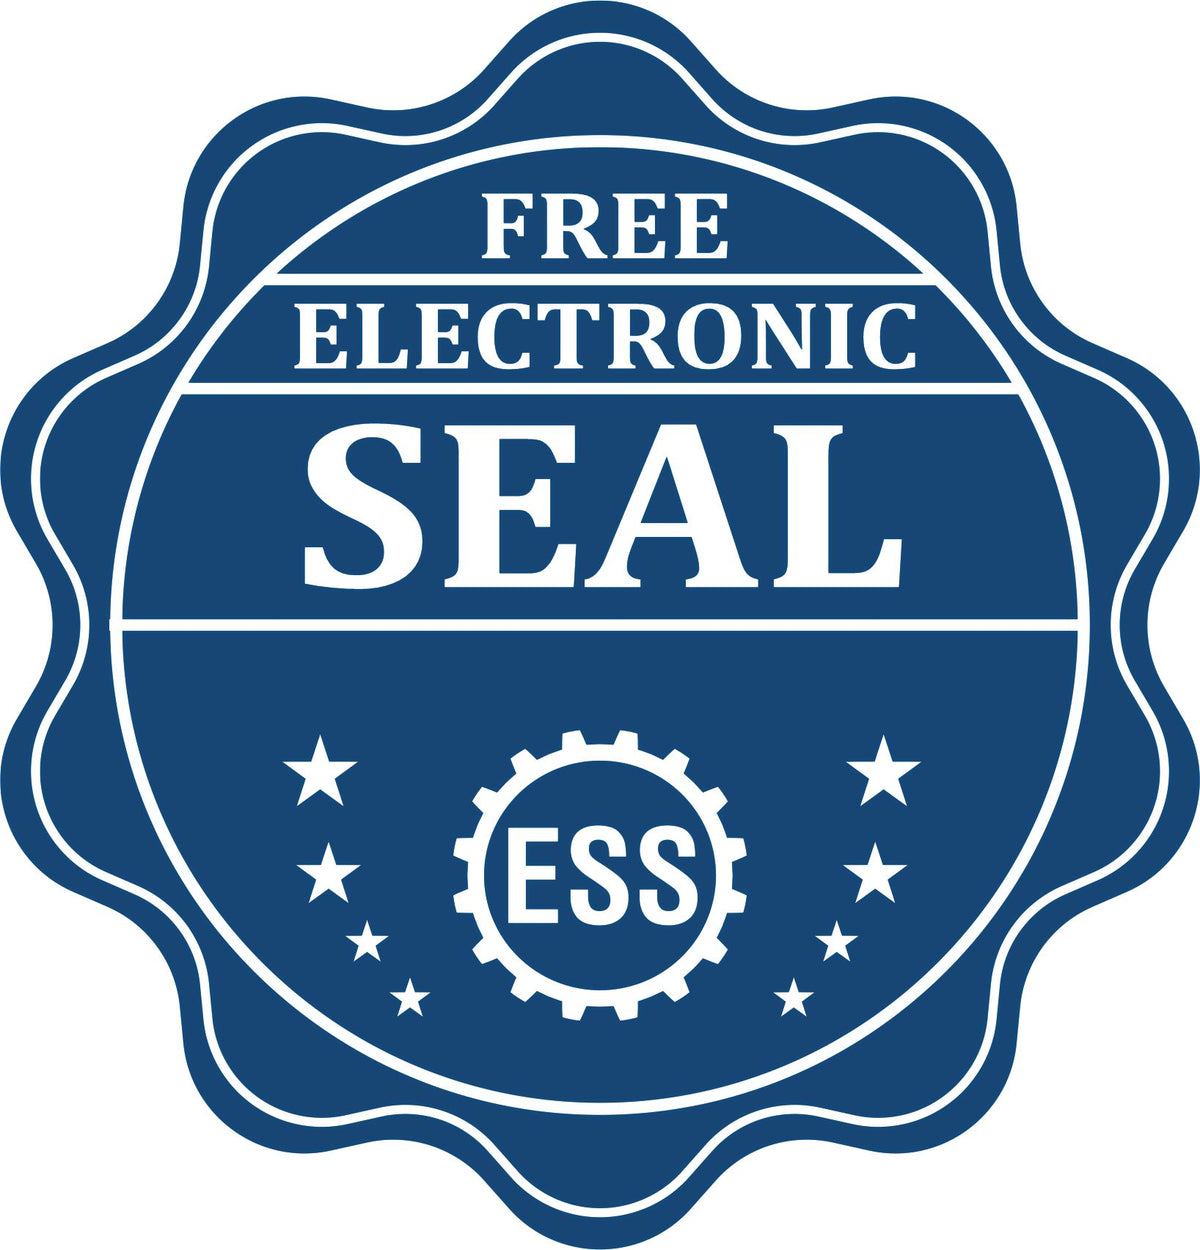 A badge showing a free electronic seal for the Extended Long Reach Minnesota Surveyor Embosser with stars and the ESS gear on the emblem.